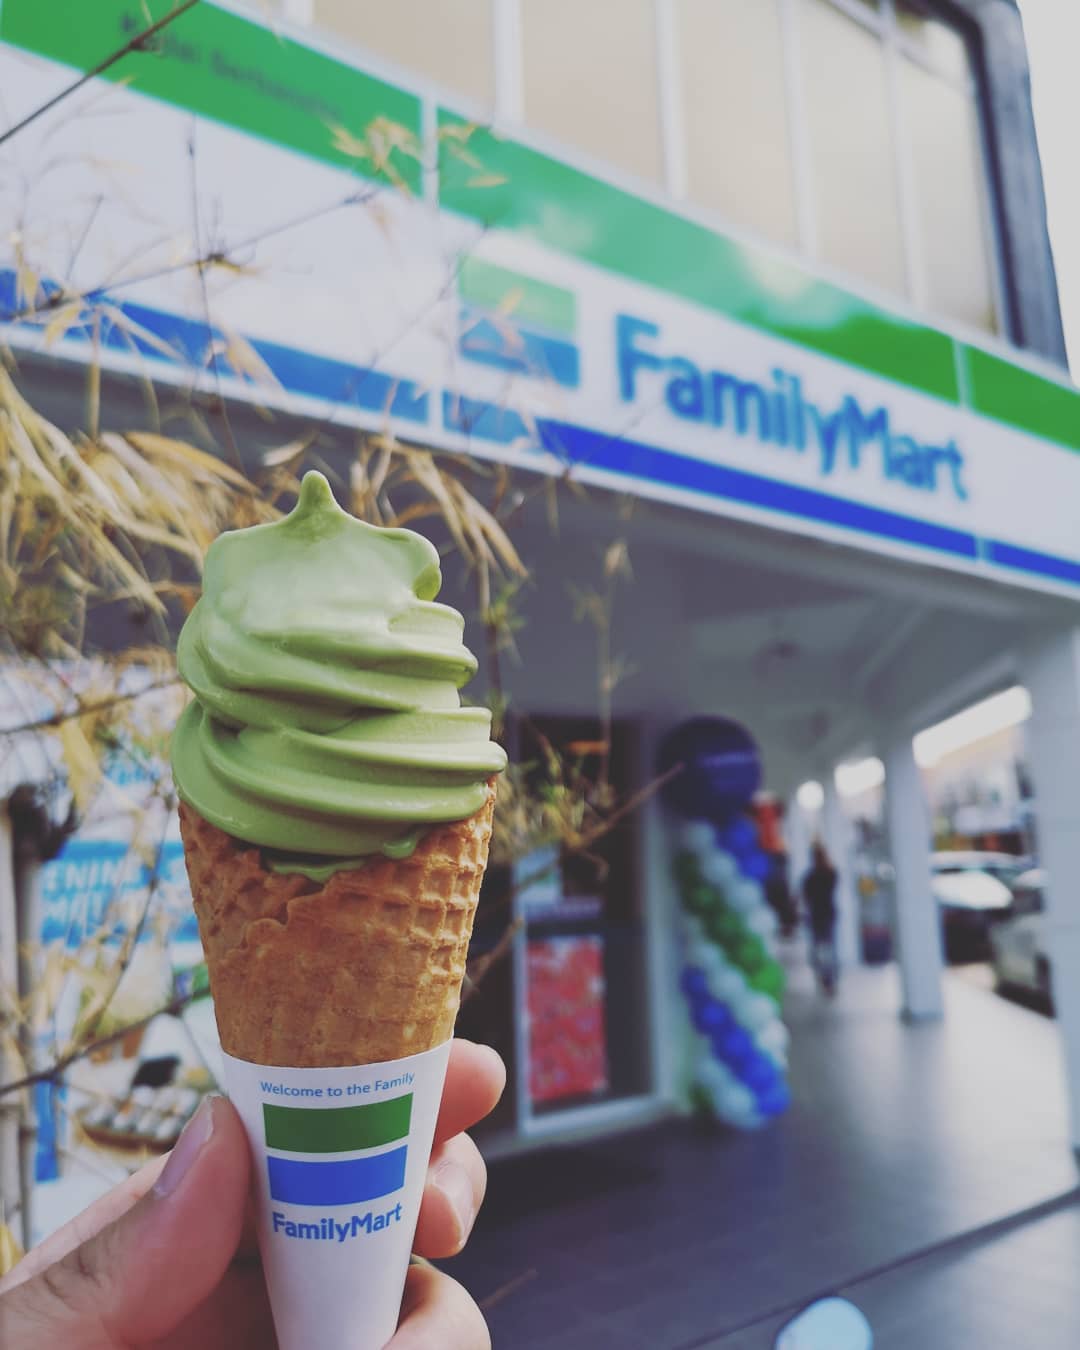 family mart is coming to r&r malaysia